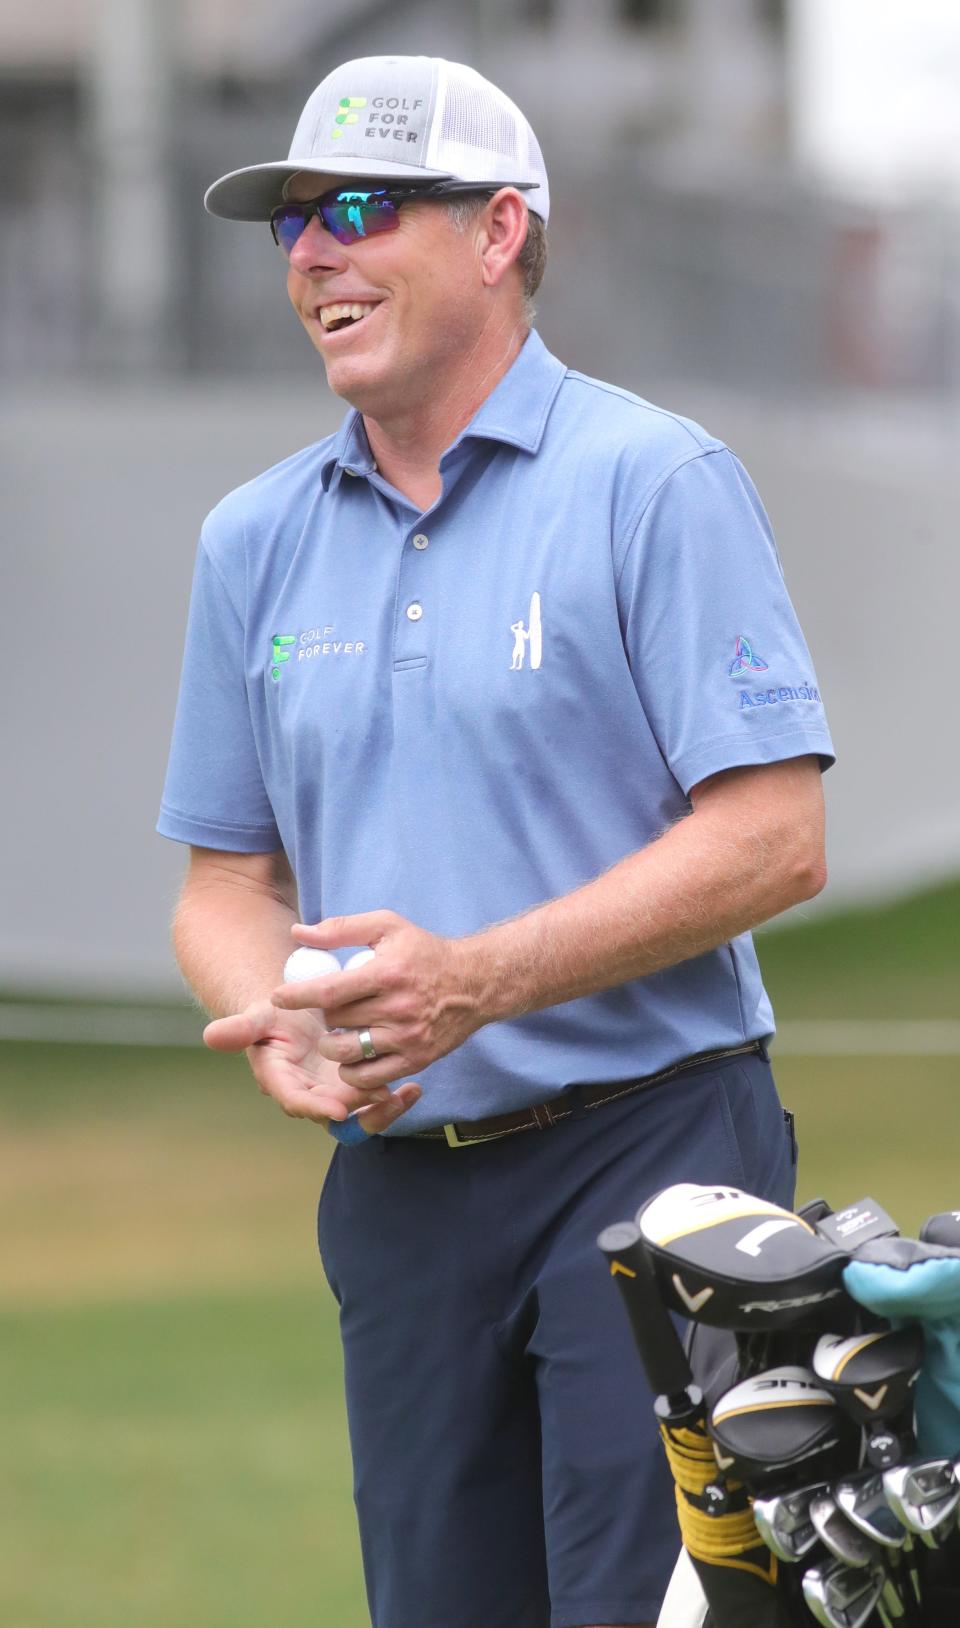 Justin Leonard gets warmed up on the practice tee at the Bridgestone Senior Players Championship Pro-Am on Wednesday, July 6, 2022 in Akron, Ohio, at Firestone Country Club.